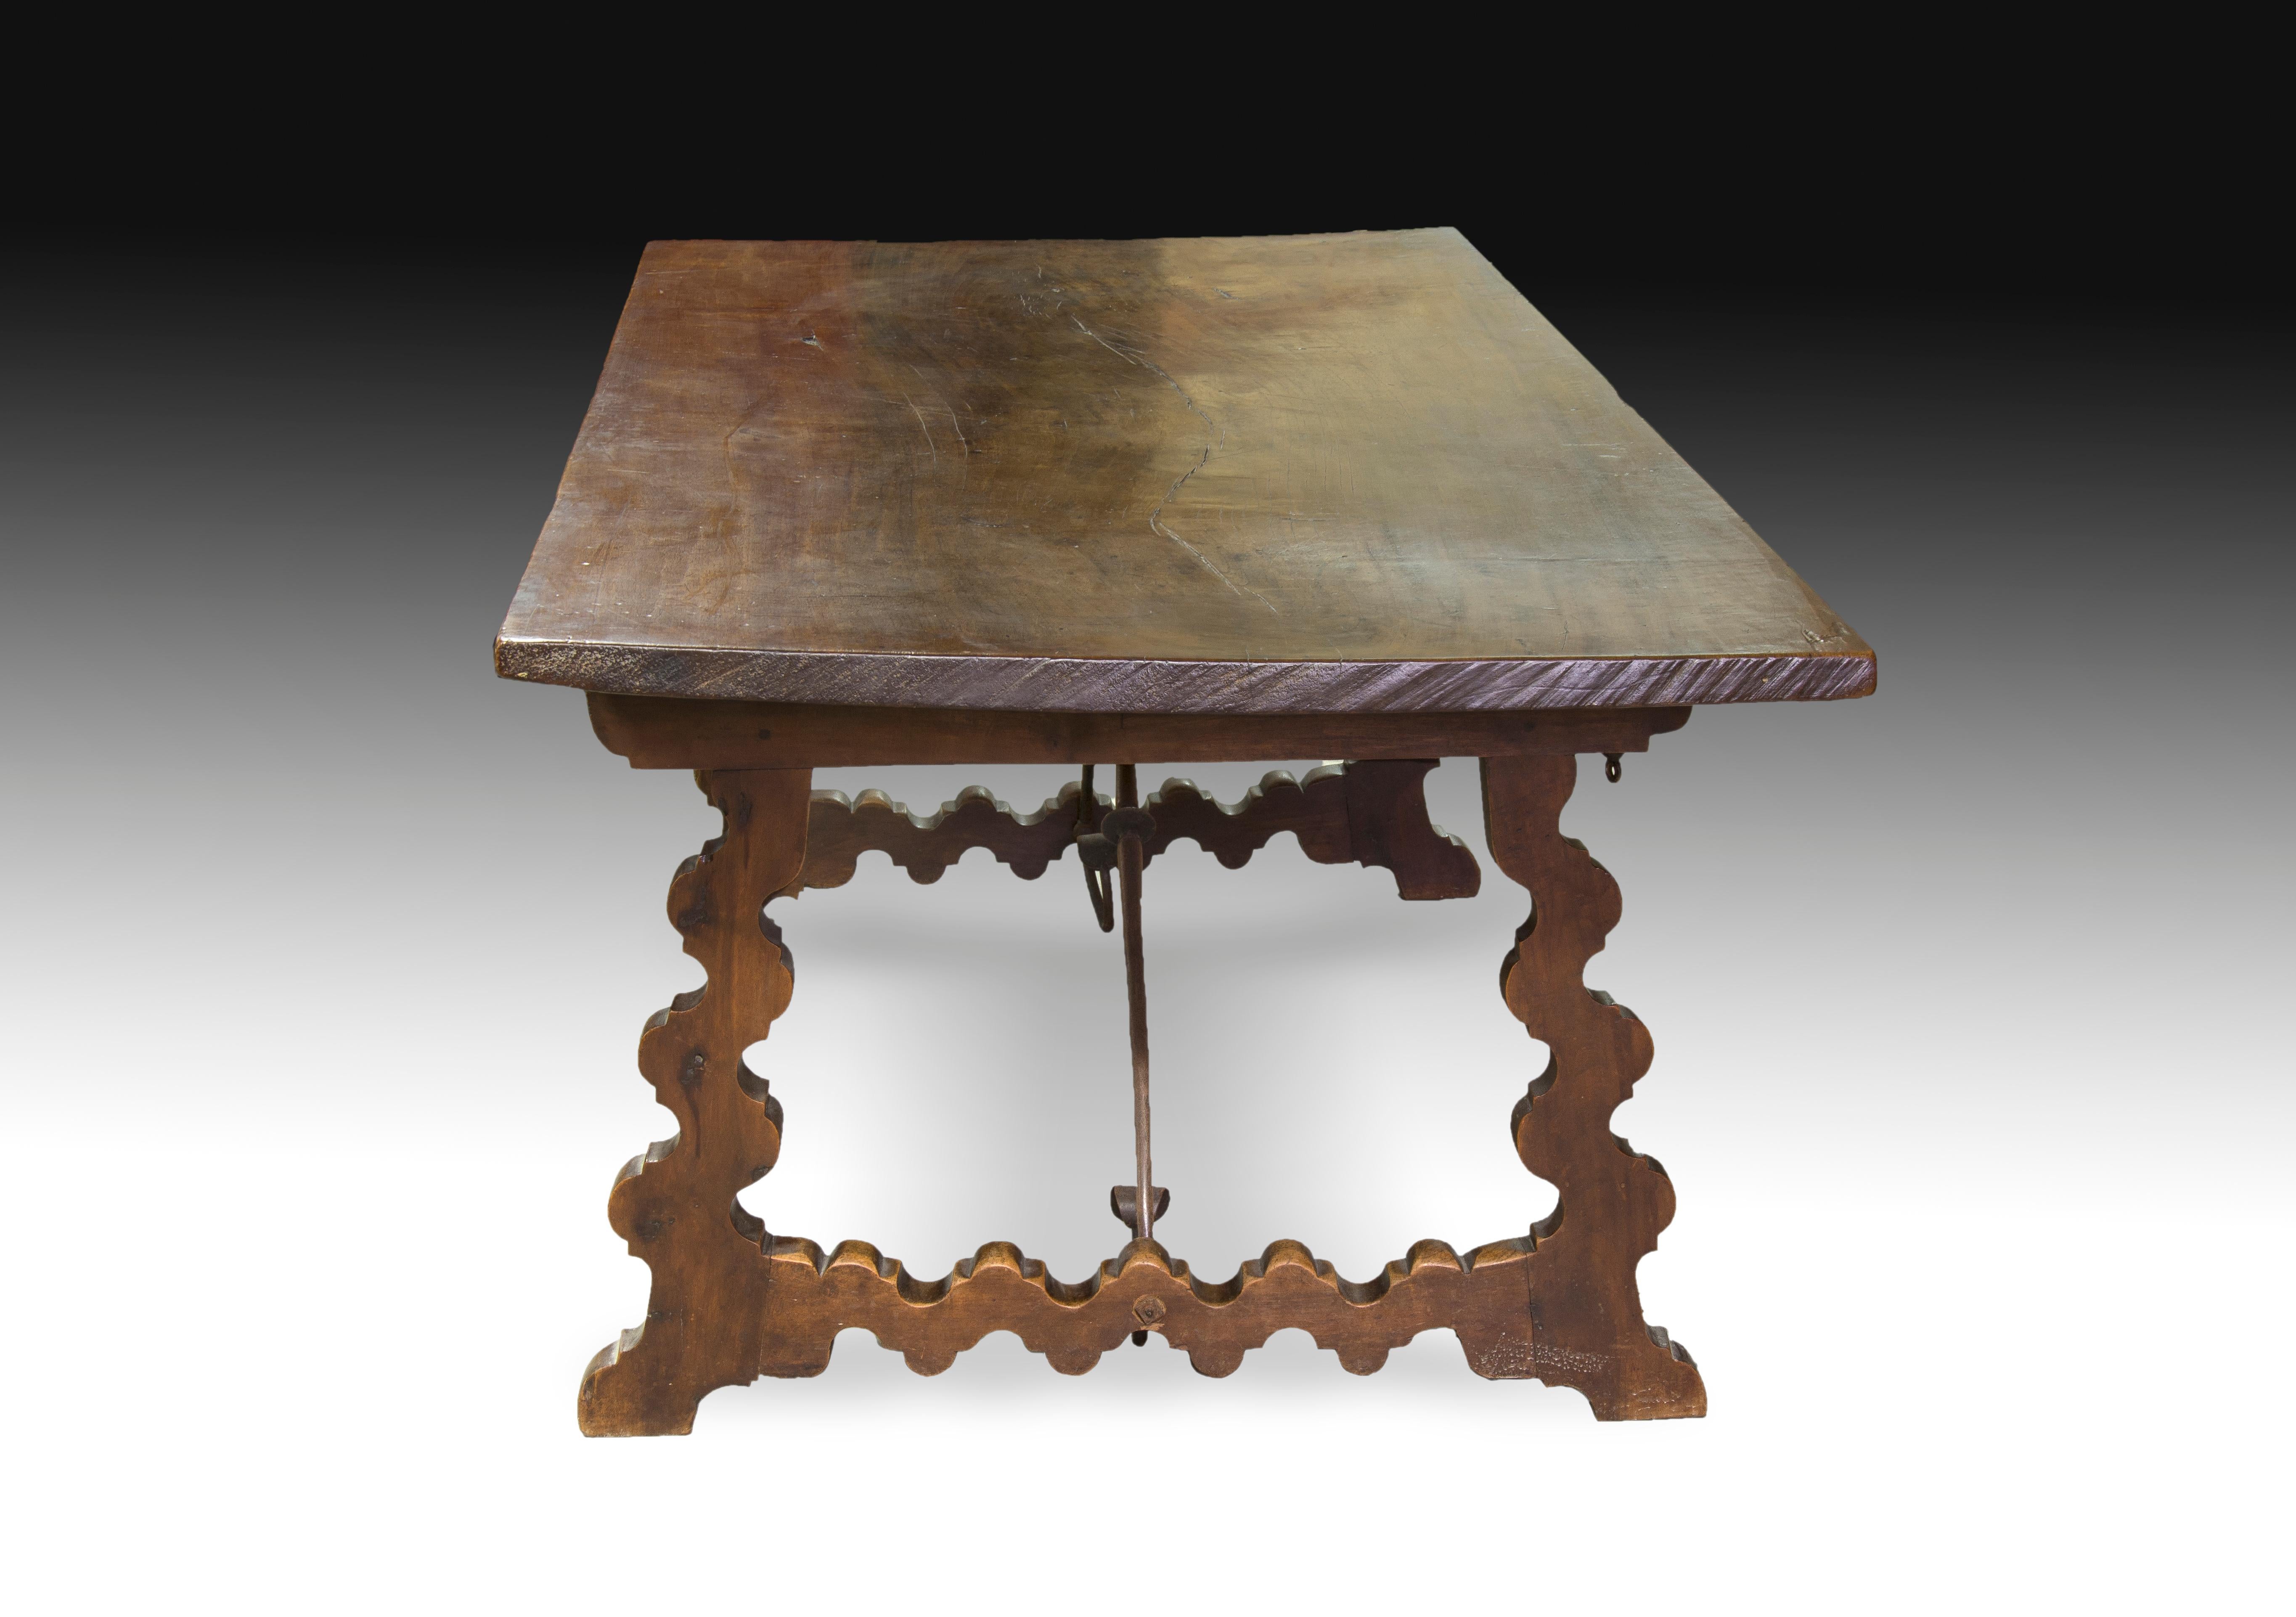 Baroque Walnut “Lyre Legs” Table with Wrought Iron Fasteners, Spain, Castille